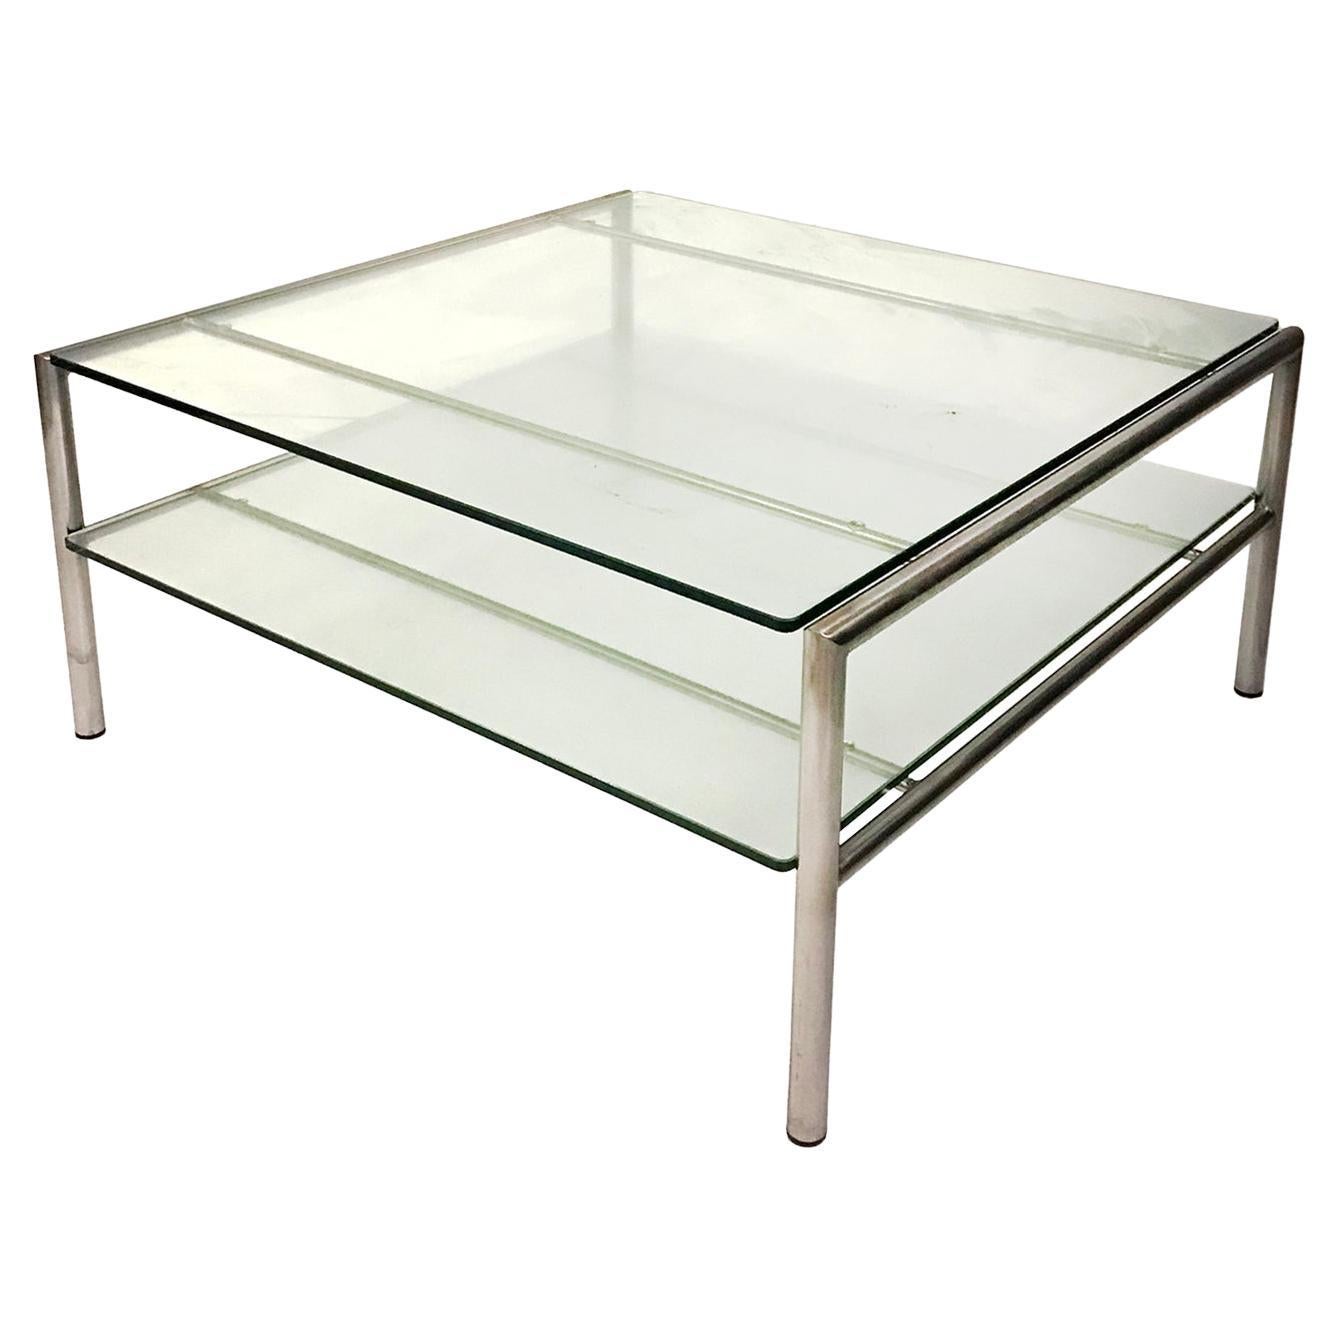 1965, Martin Visser, Rare Double Glas Coffee Table Designed for SzZ01 Easy Chair